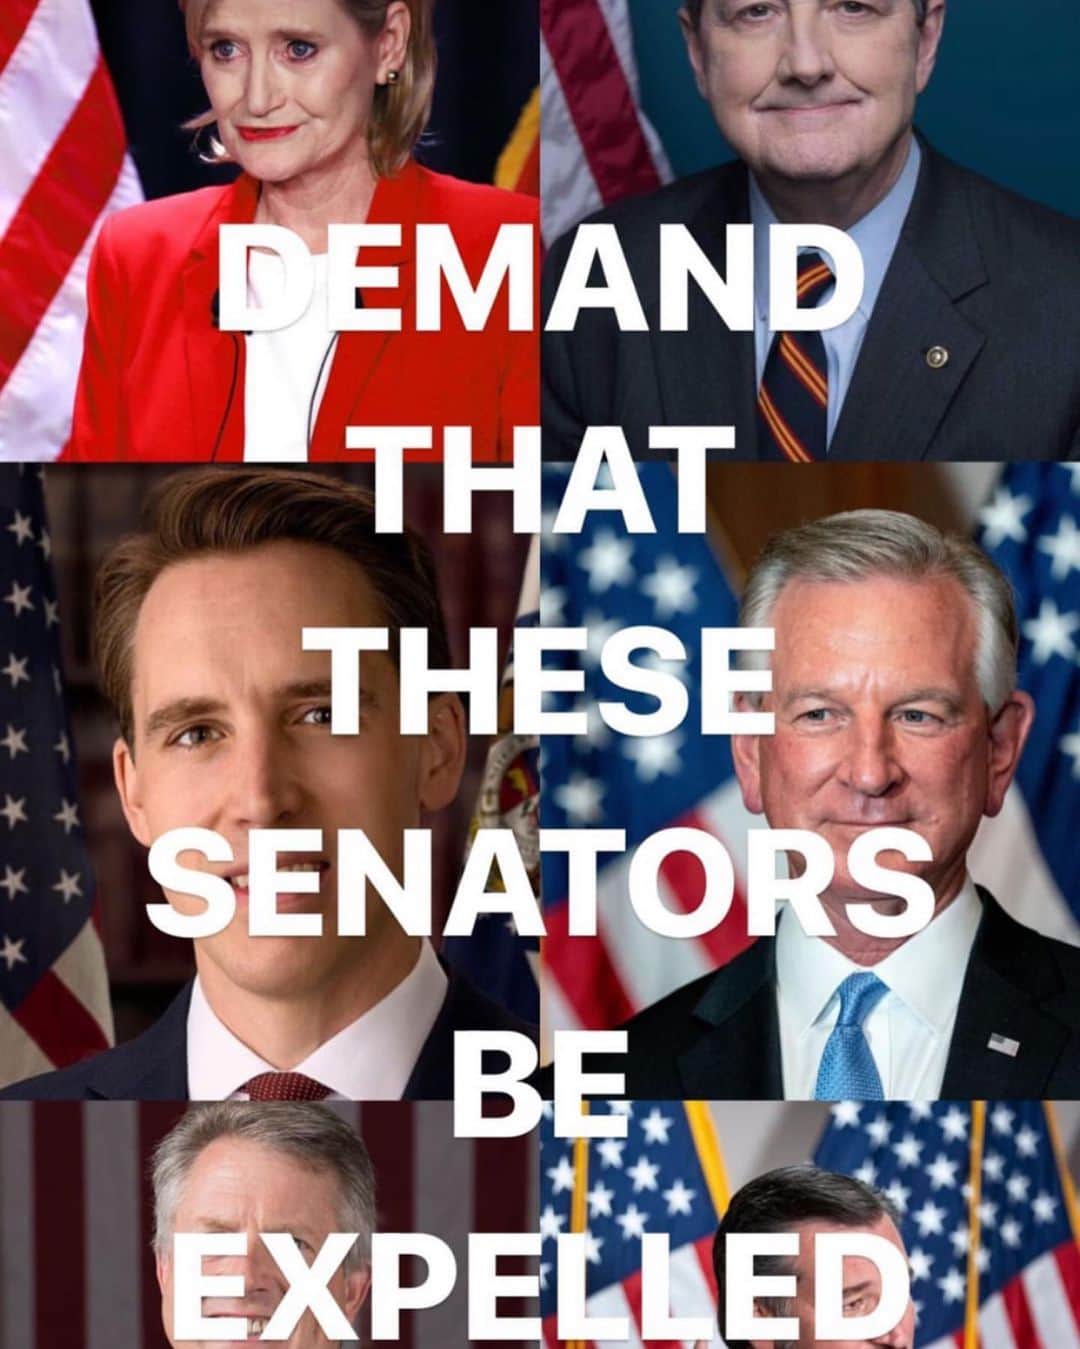 トームさんのインスタグラム写真 - (トームInstagram)「THERE IS PRECEDENT FOR IT: The senators who were expelled after refusing to accept Lincoln’s election . IMAGE @homegrownterrorists  By Gillian Brockell Jan. 5, 2021 @washingtonpost  At least a dozen Republican senators have signed on to a last-ditch effort to overturn the results of the presidential election, vowing to object to the electoral vote totals from several swing states when they are certified in a joint session of Congress on Wednesday. Support our journalism. Subscribe today. Among those who refuse to accept President-elect Joe Biden’s victory over President Trump: Ted Cruz (Tex.), Josh Hawley (Mo.), Marsha Blackburn (Tenn.), Ron Johnson (Wis.), John Kennedy (La.) and James Lankford (Okla.). .  That has critics accusing the lawmakers of sedition — inciting rebellion against the authority of the government — and calling for their expulsion. No senator has been expelled since the Civil War, when 14 mostly Southern senators were kicked out by their colleagues. .  The fuse had been lit Nov. 6, 1860. Abraham Lincoln won the presidential election despite not being on the ballot in 10 Southern states and earning less than 40 percent of the popular vote. Four days after the election, the first senator bailed; James Chesnut of South Carolina submitted his resignation in a one-sentence note, which was “accepted enthusiastically” by other lawmakers, according to New York Times coverage. As states seceded that December and January, more senators followed their states out the door. Some simply didn’t show up for the next session; others made formal resignations. Crowds lined up in the frigid dawn to hear Sen. Jefferson Davis‘s farewell address, during which he made clear he thought secession was justified because he believed Lincoln would end slavery: .  The audience wept openly and gave him rapturous applause. A few weeks later, he was president of the Confederacy. .  In March, the remaining senators debated what to do about the empty seats. Did they not exist anymore because those states said they were no longer a part of the Union? Or if states were not permitted to secede, then were they merely vacant? They decided on the latter.」1月8日 13時42分 - tomenyc